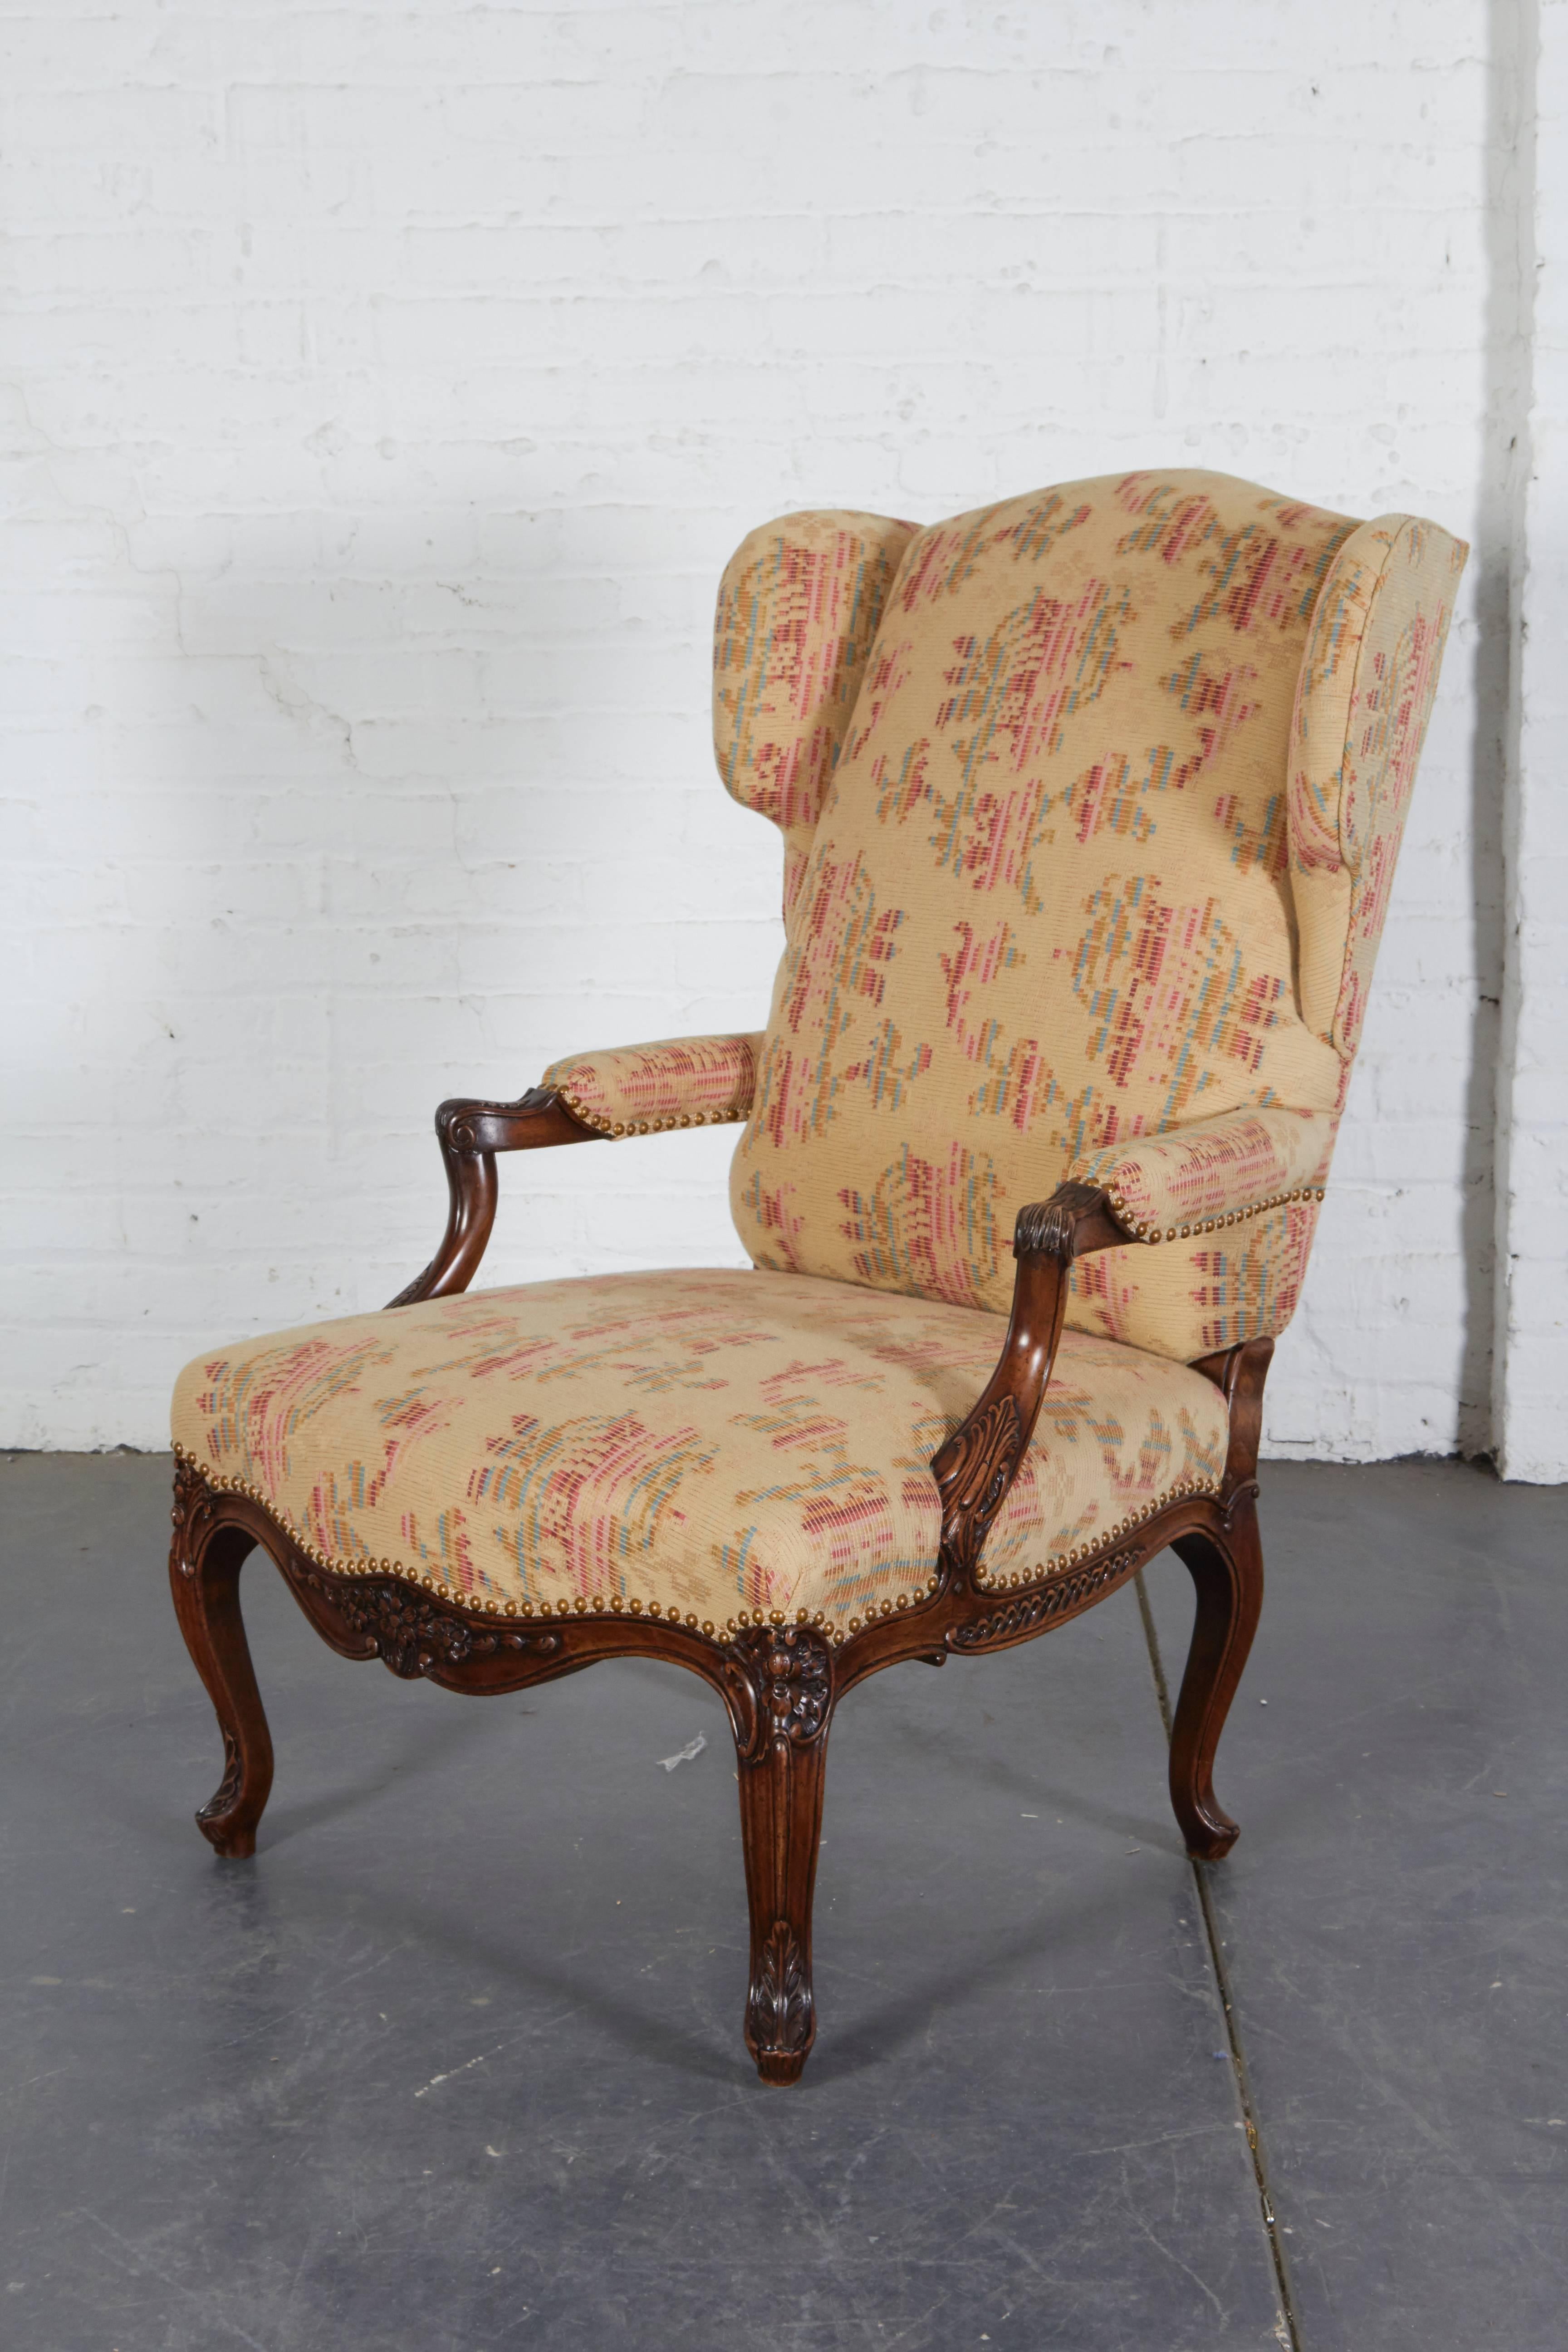 Made after an antique model supplied by interior designer David Easton for a private residence. Features fine hand-carved detailing and contrasting check-upholstered back. Another pair also available.